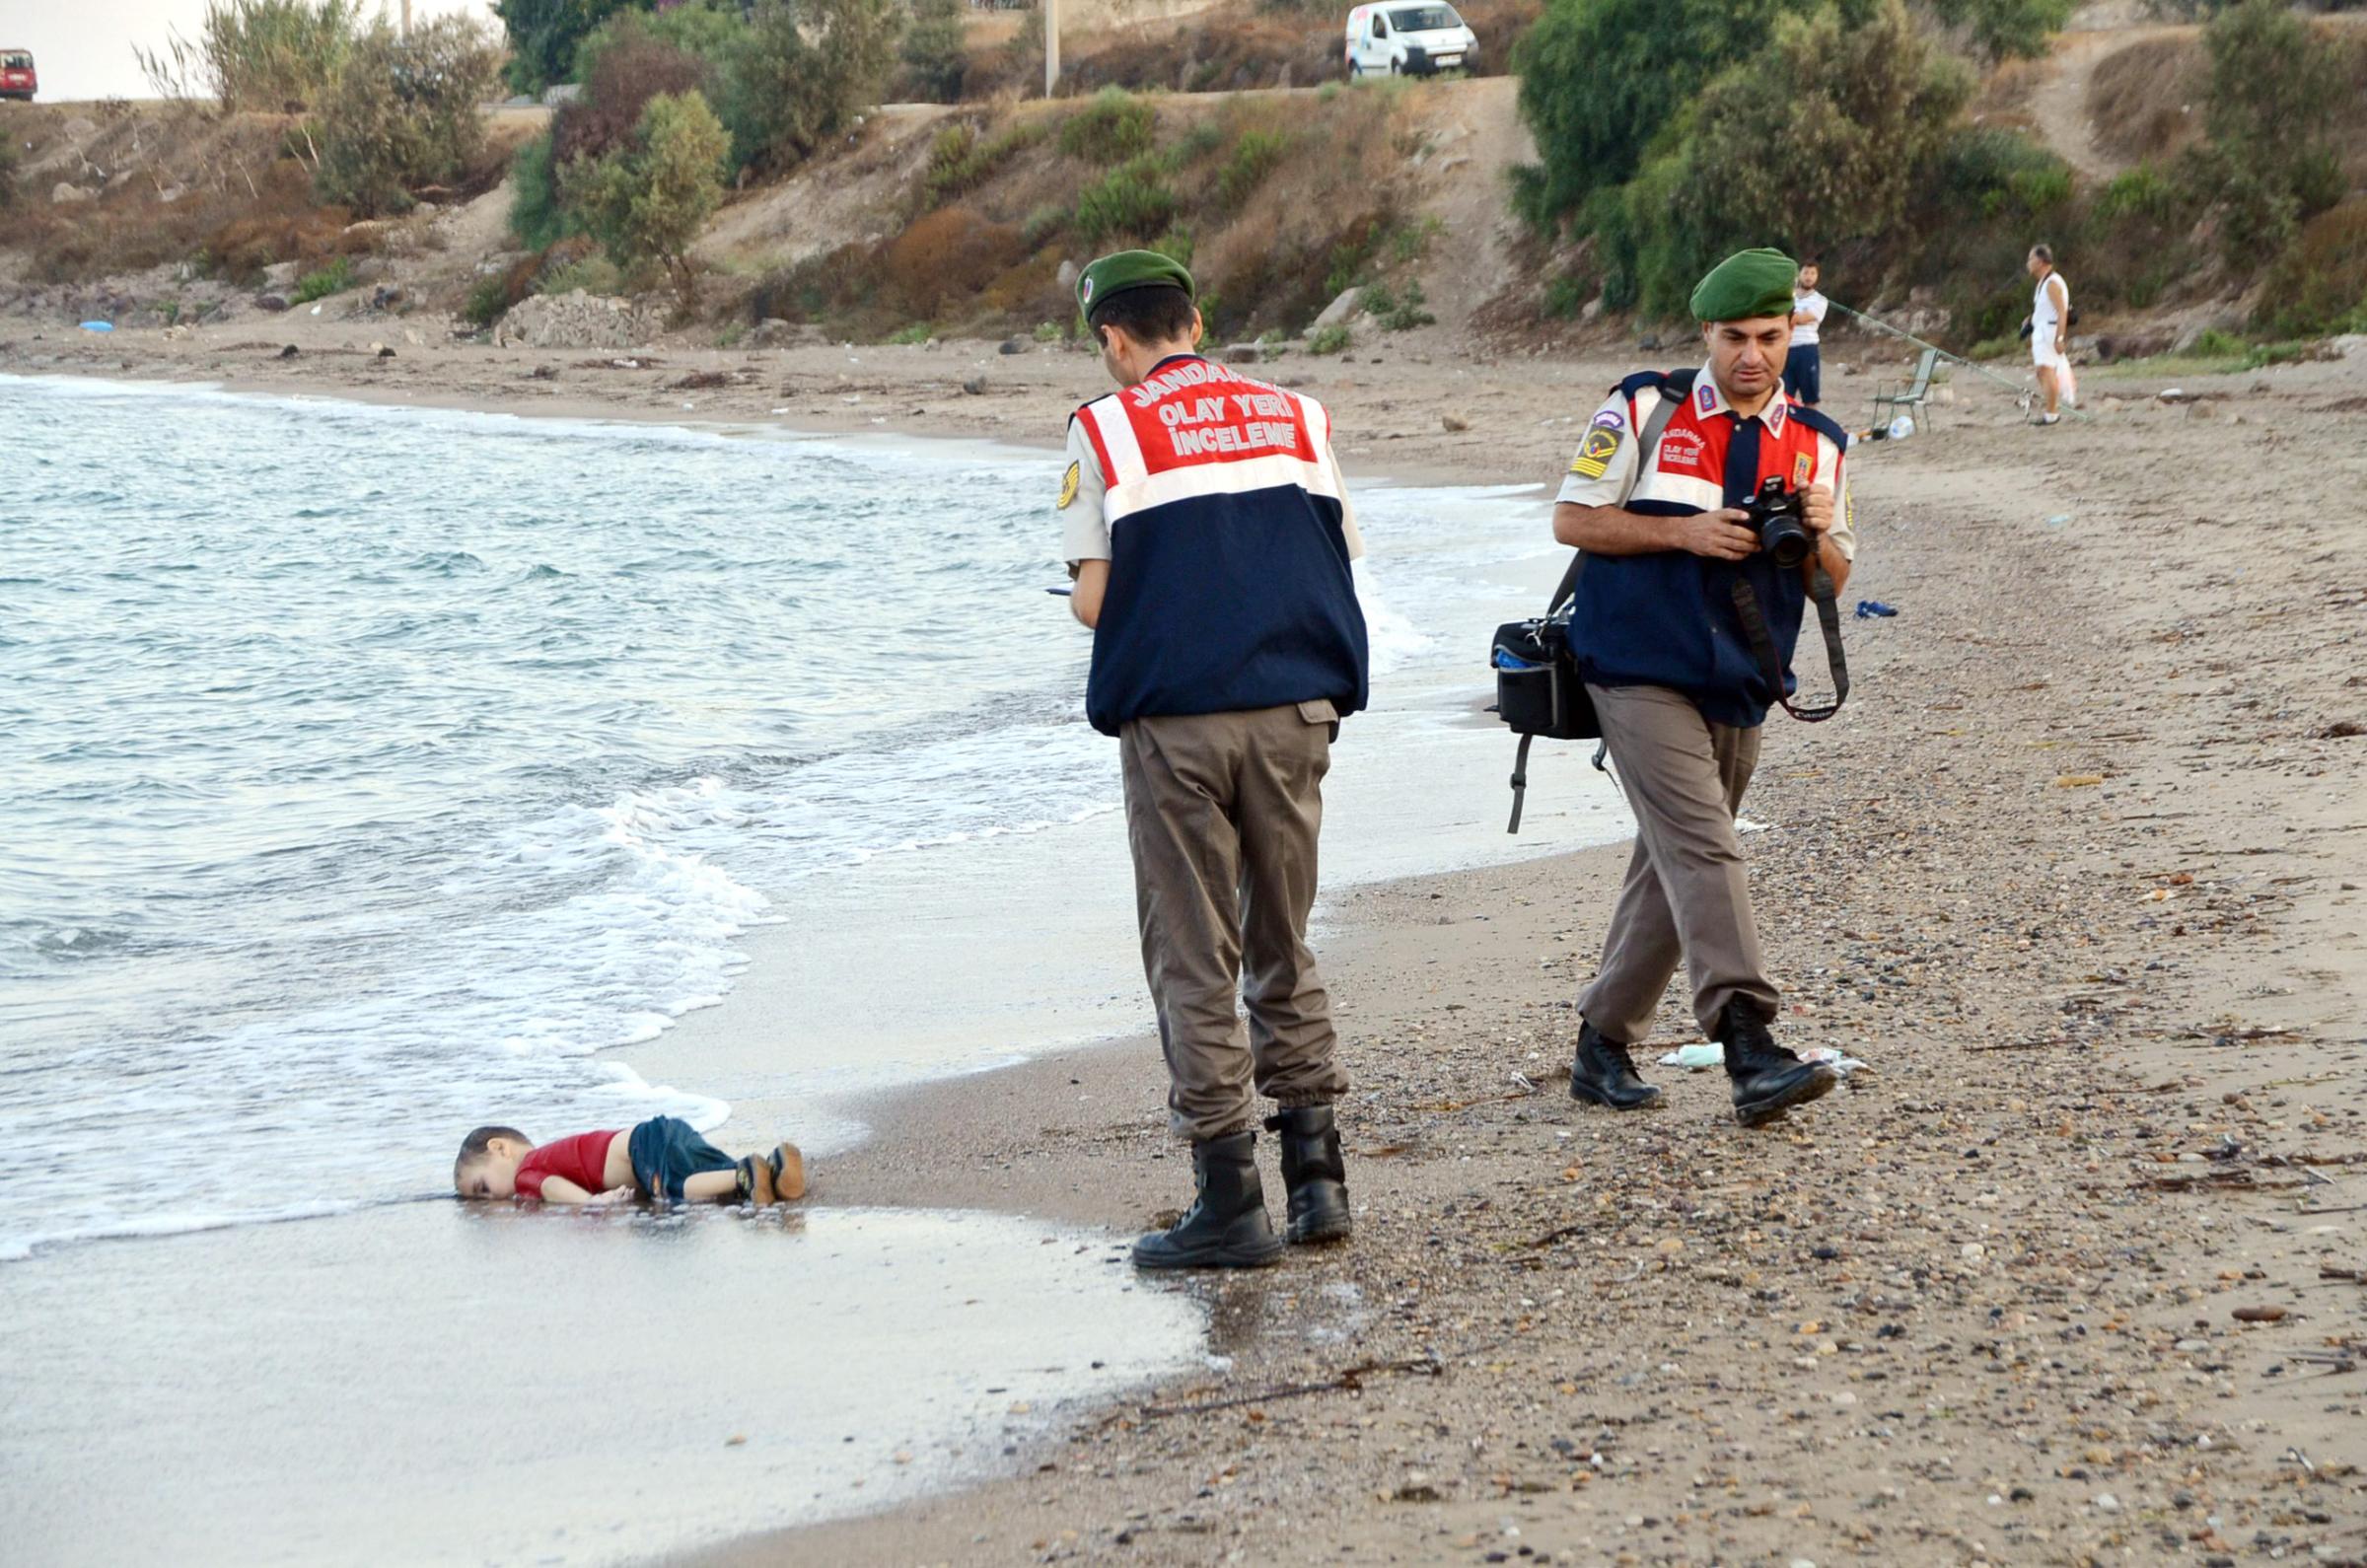 Members of the Turkish gendarmerie stand near by the washed-up body of a refugee child who drowned during a failed attempt to sail to the Greek island of Kos, at the shore in the coastal town of Bodrum, Turkey, on Sept. 2, 2015. At least 11 Syrian migrants died in boat sank after leaving Turkey for the Greek island of Kos.